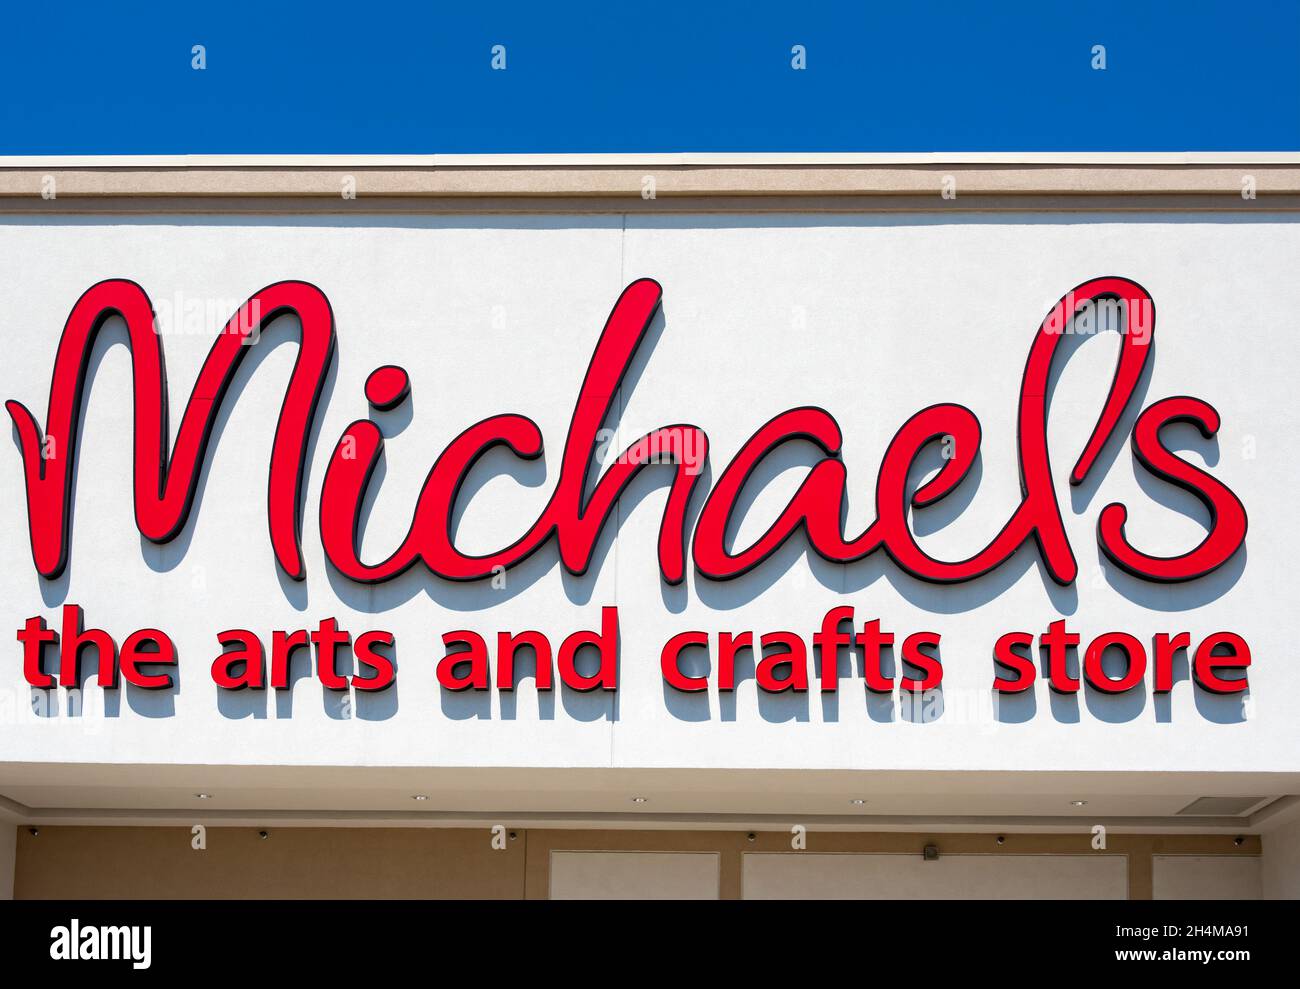 https://c8.alamy.com/comp/2H4MA91/entrance-sign-to-a-michaels-art-and-craft-store-in-toronto-canadanov-2-2021-2H4MA91.jpg